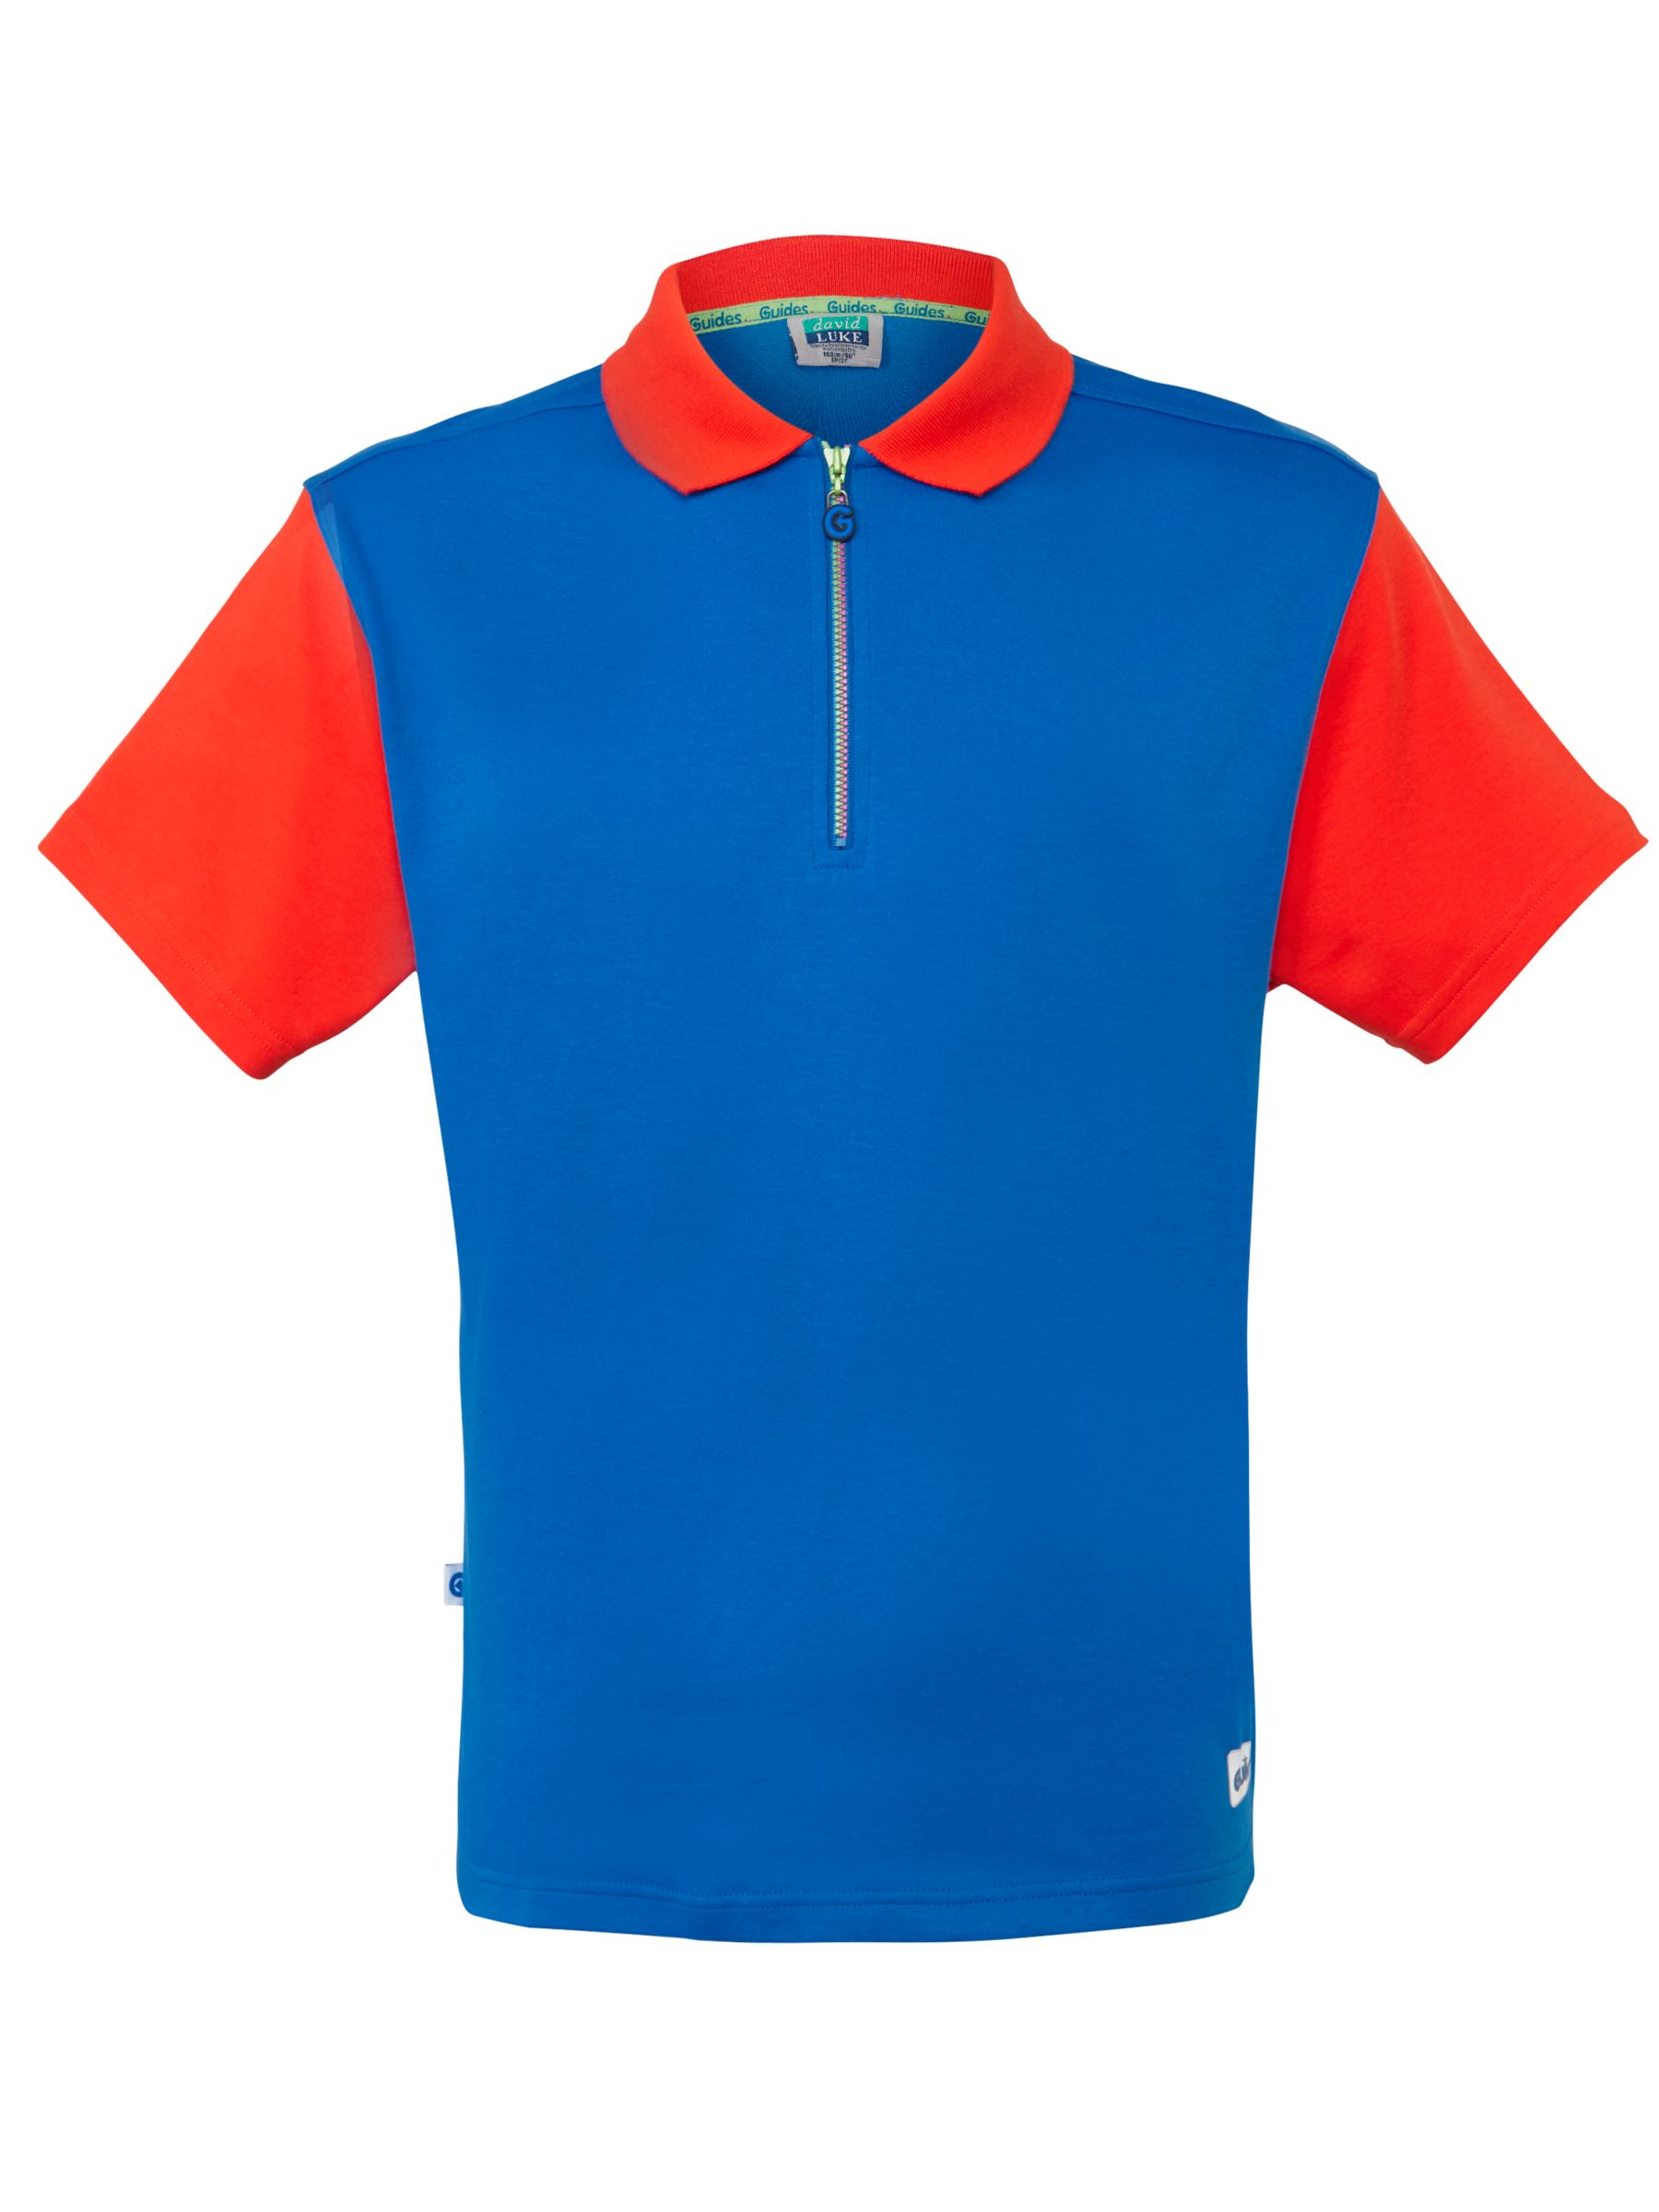 royal blue and red shirt